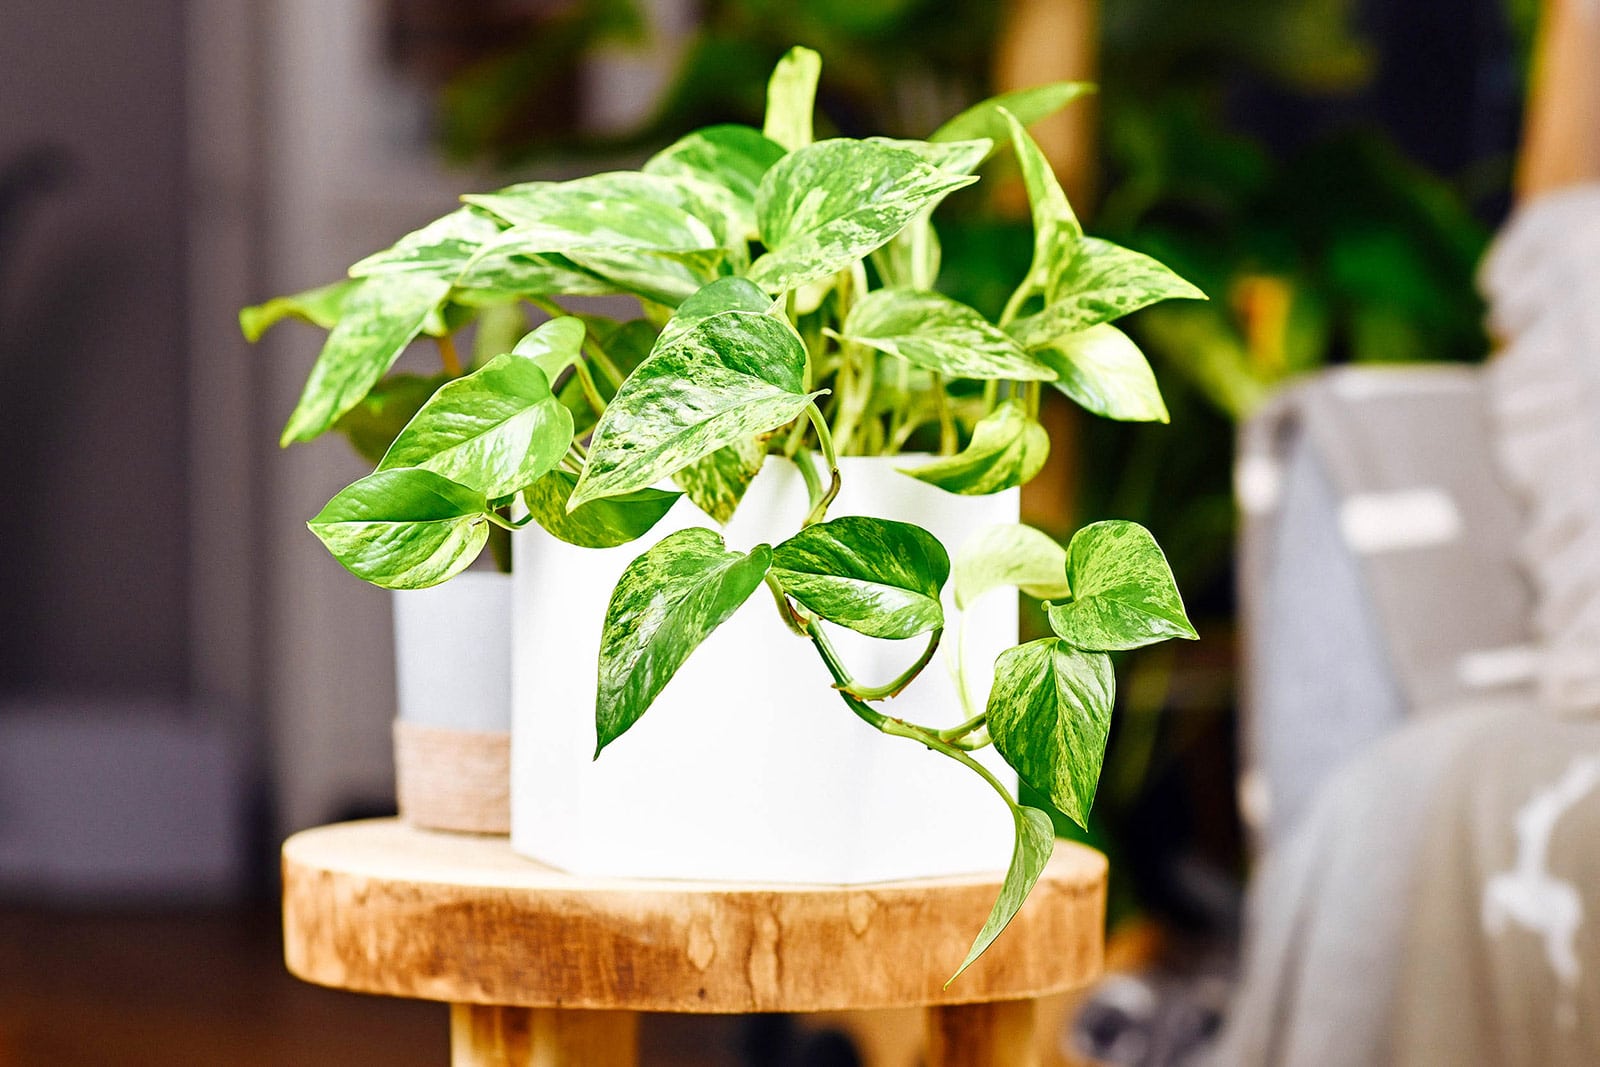 Marble Queen pothos plant (devil's ivy) in a white ceramic pot on a wooden stool with other houseplants in the background